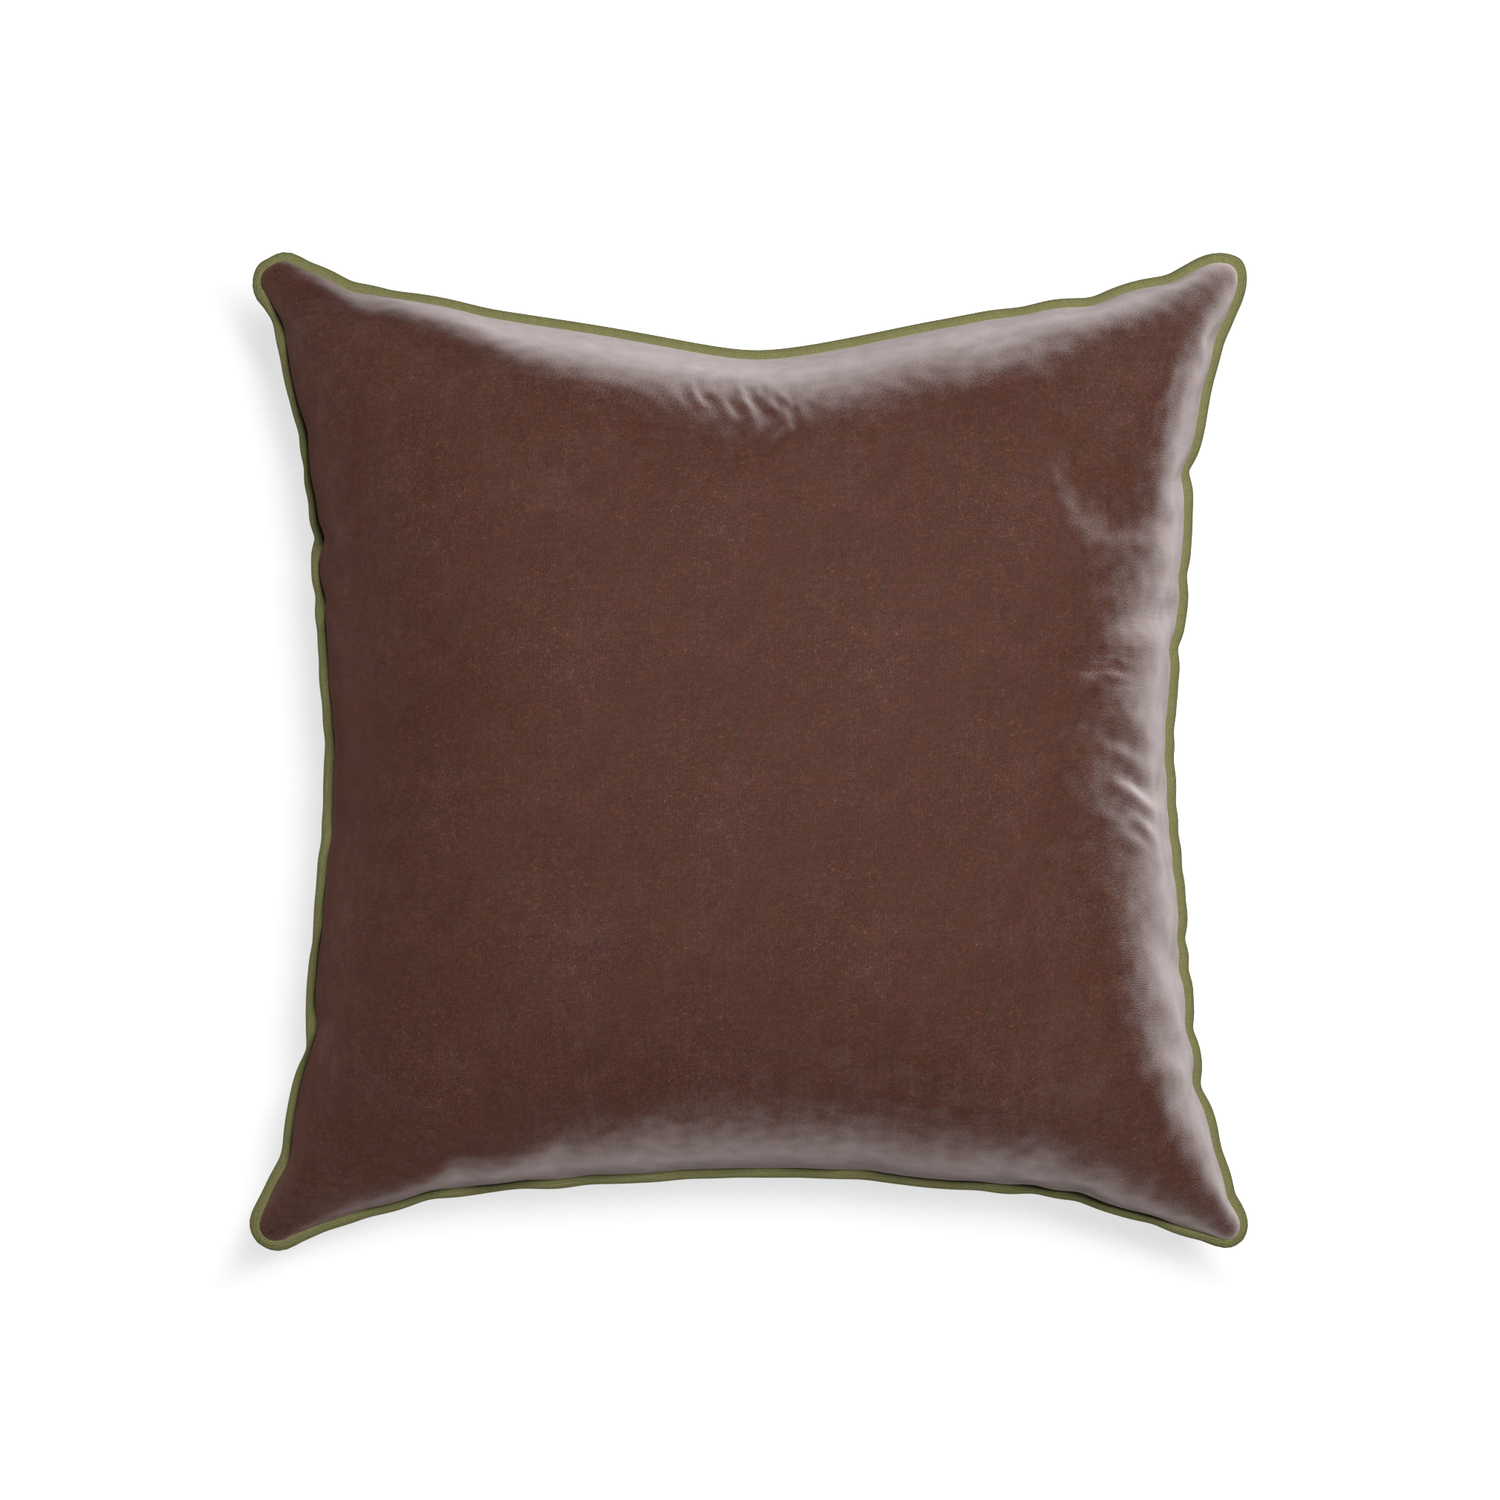 square brown velvet pillow with fern green piping